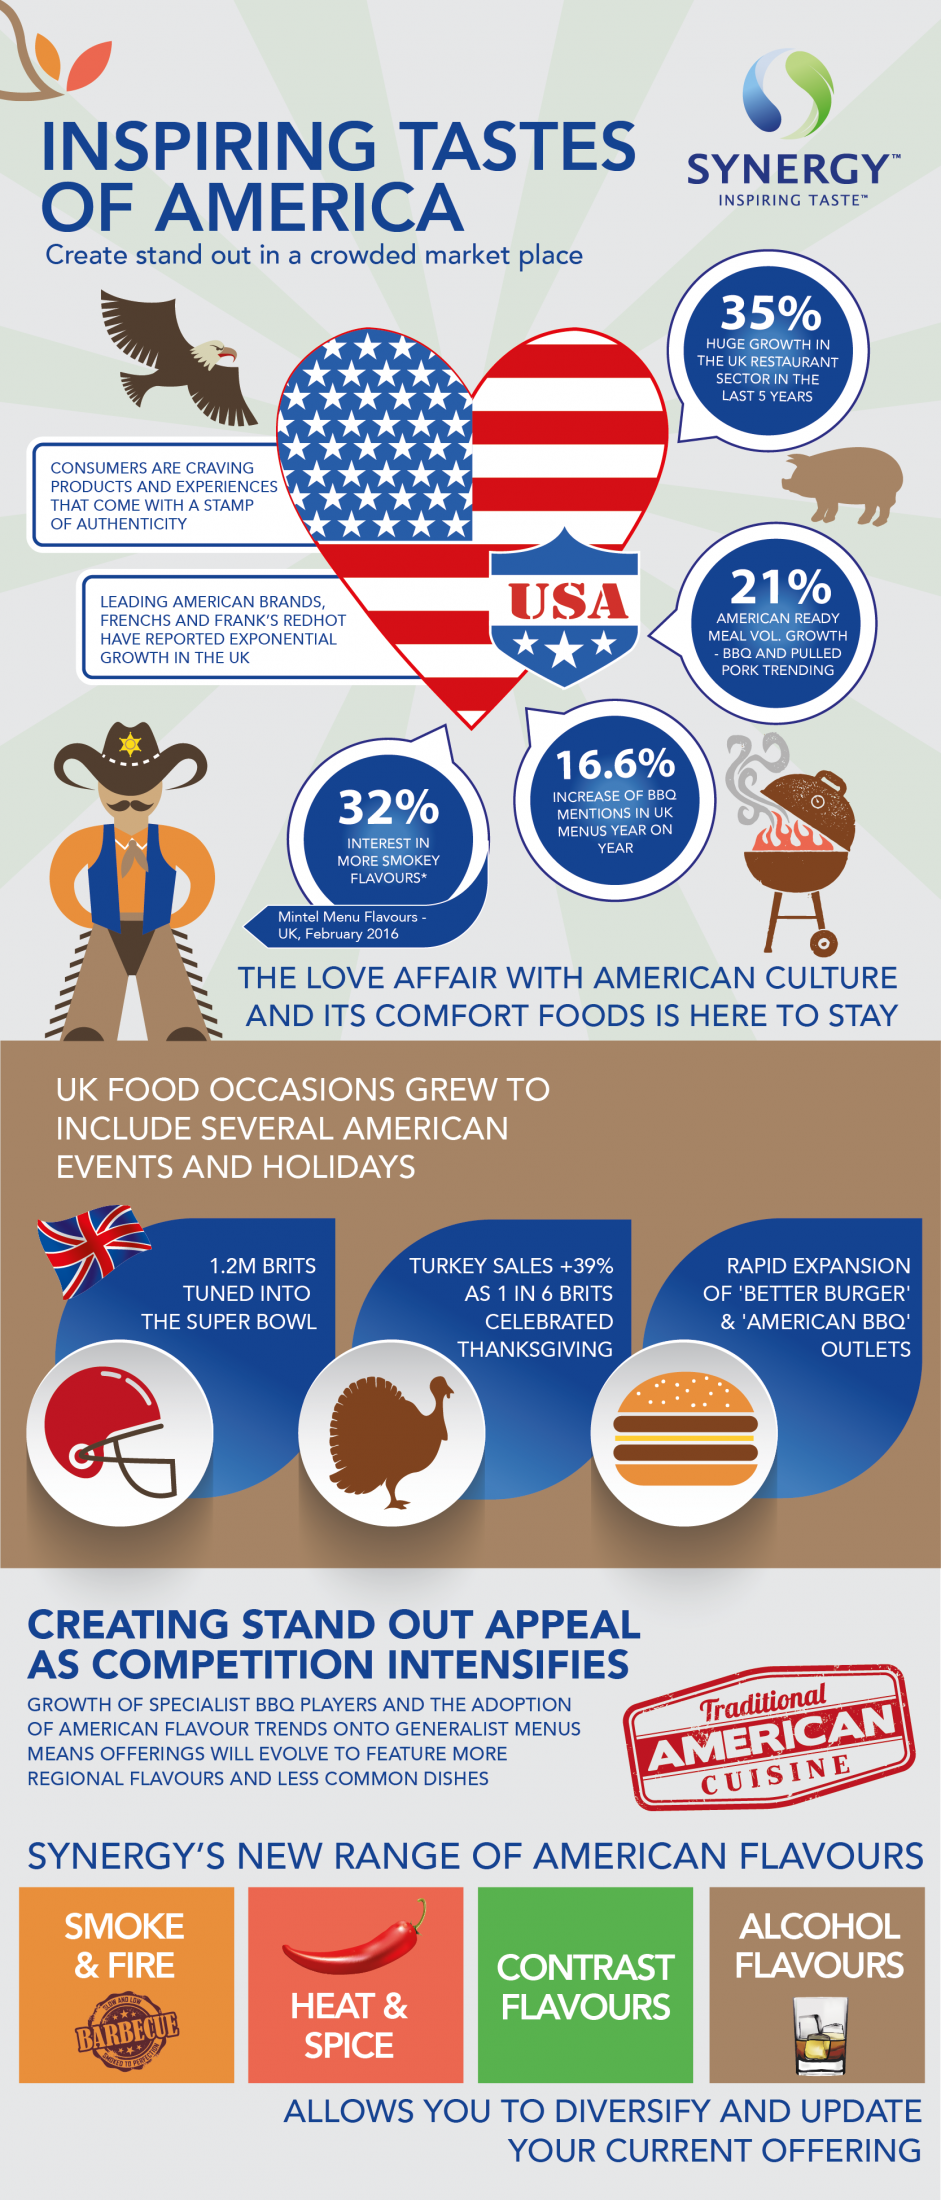 Inspiring_tastes_of_America_infographic_of_key_flavours